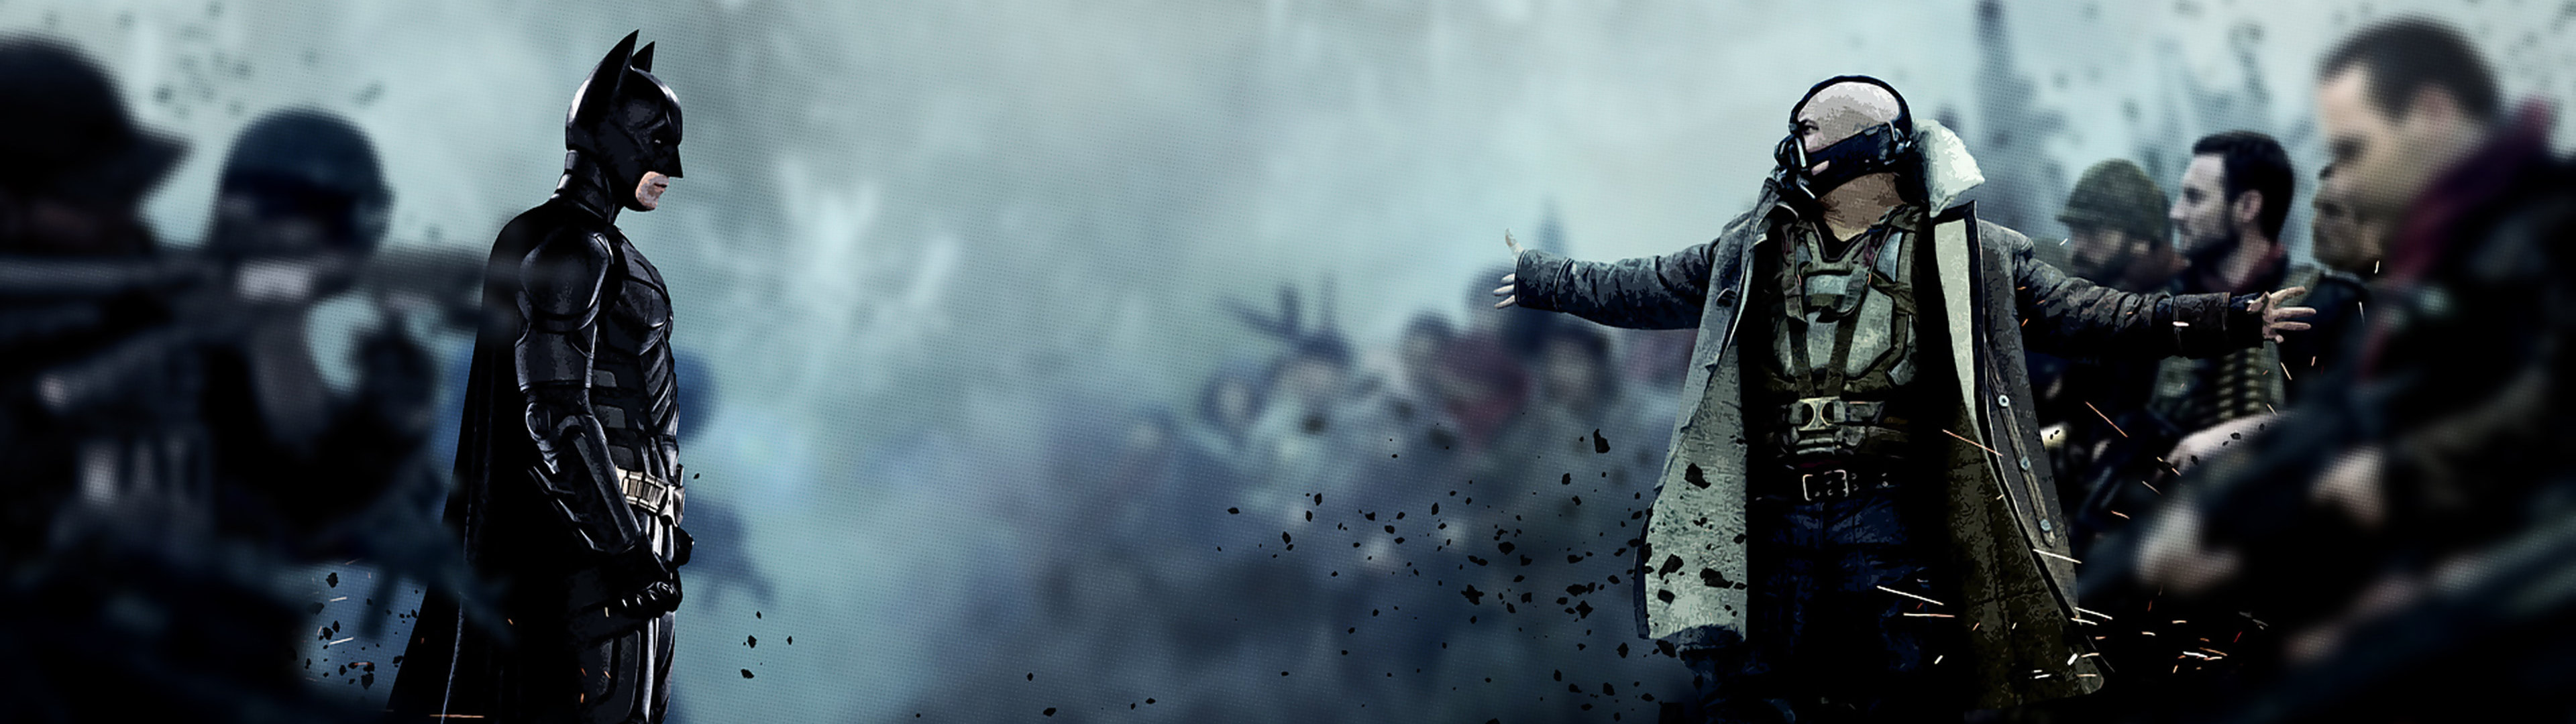 3840x1080 Awesome Dark Knight Rises Wallpaper Dual Picture